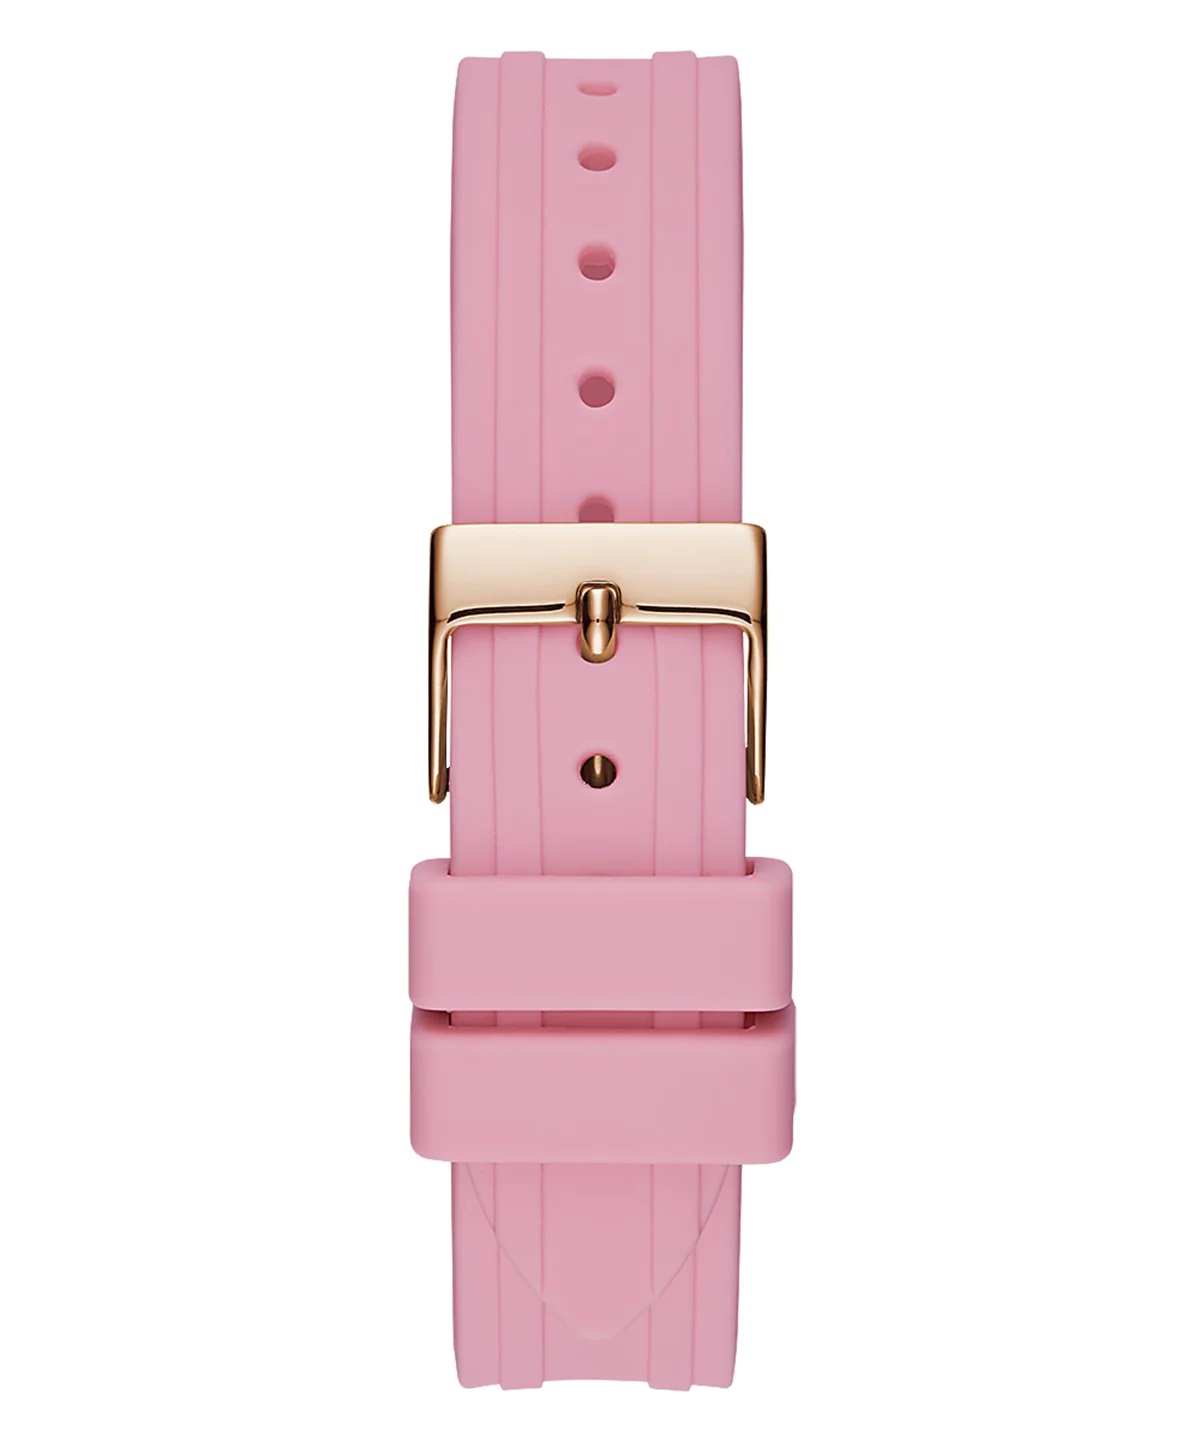 ĐỒNG HỒ NỮ ĐEO TAY GUESS LADIES PINK ROSE GOLD TONE ANALOG SILICONE STRAP WATCH GW0034L3 7